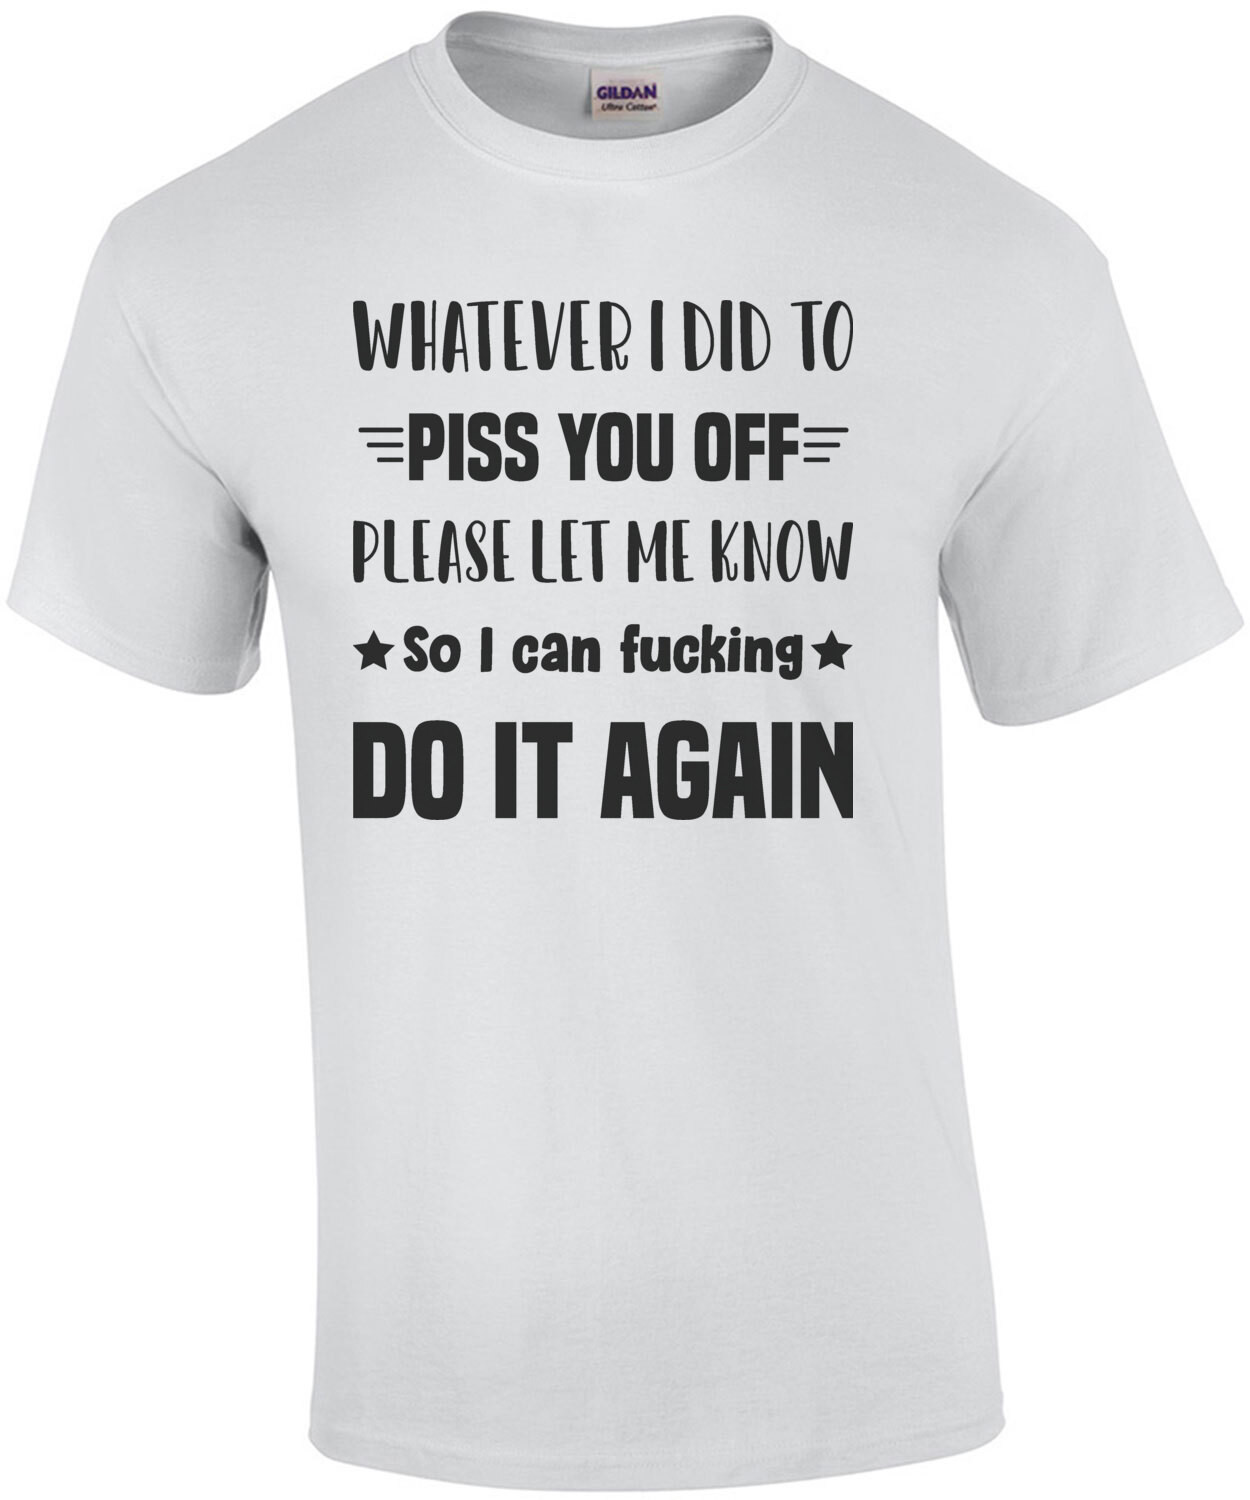 Whatever I did to piss you off please let me know so I can fucking do it again - funny t-shirt